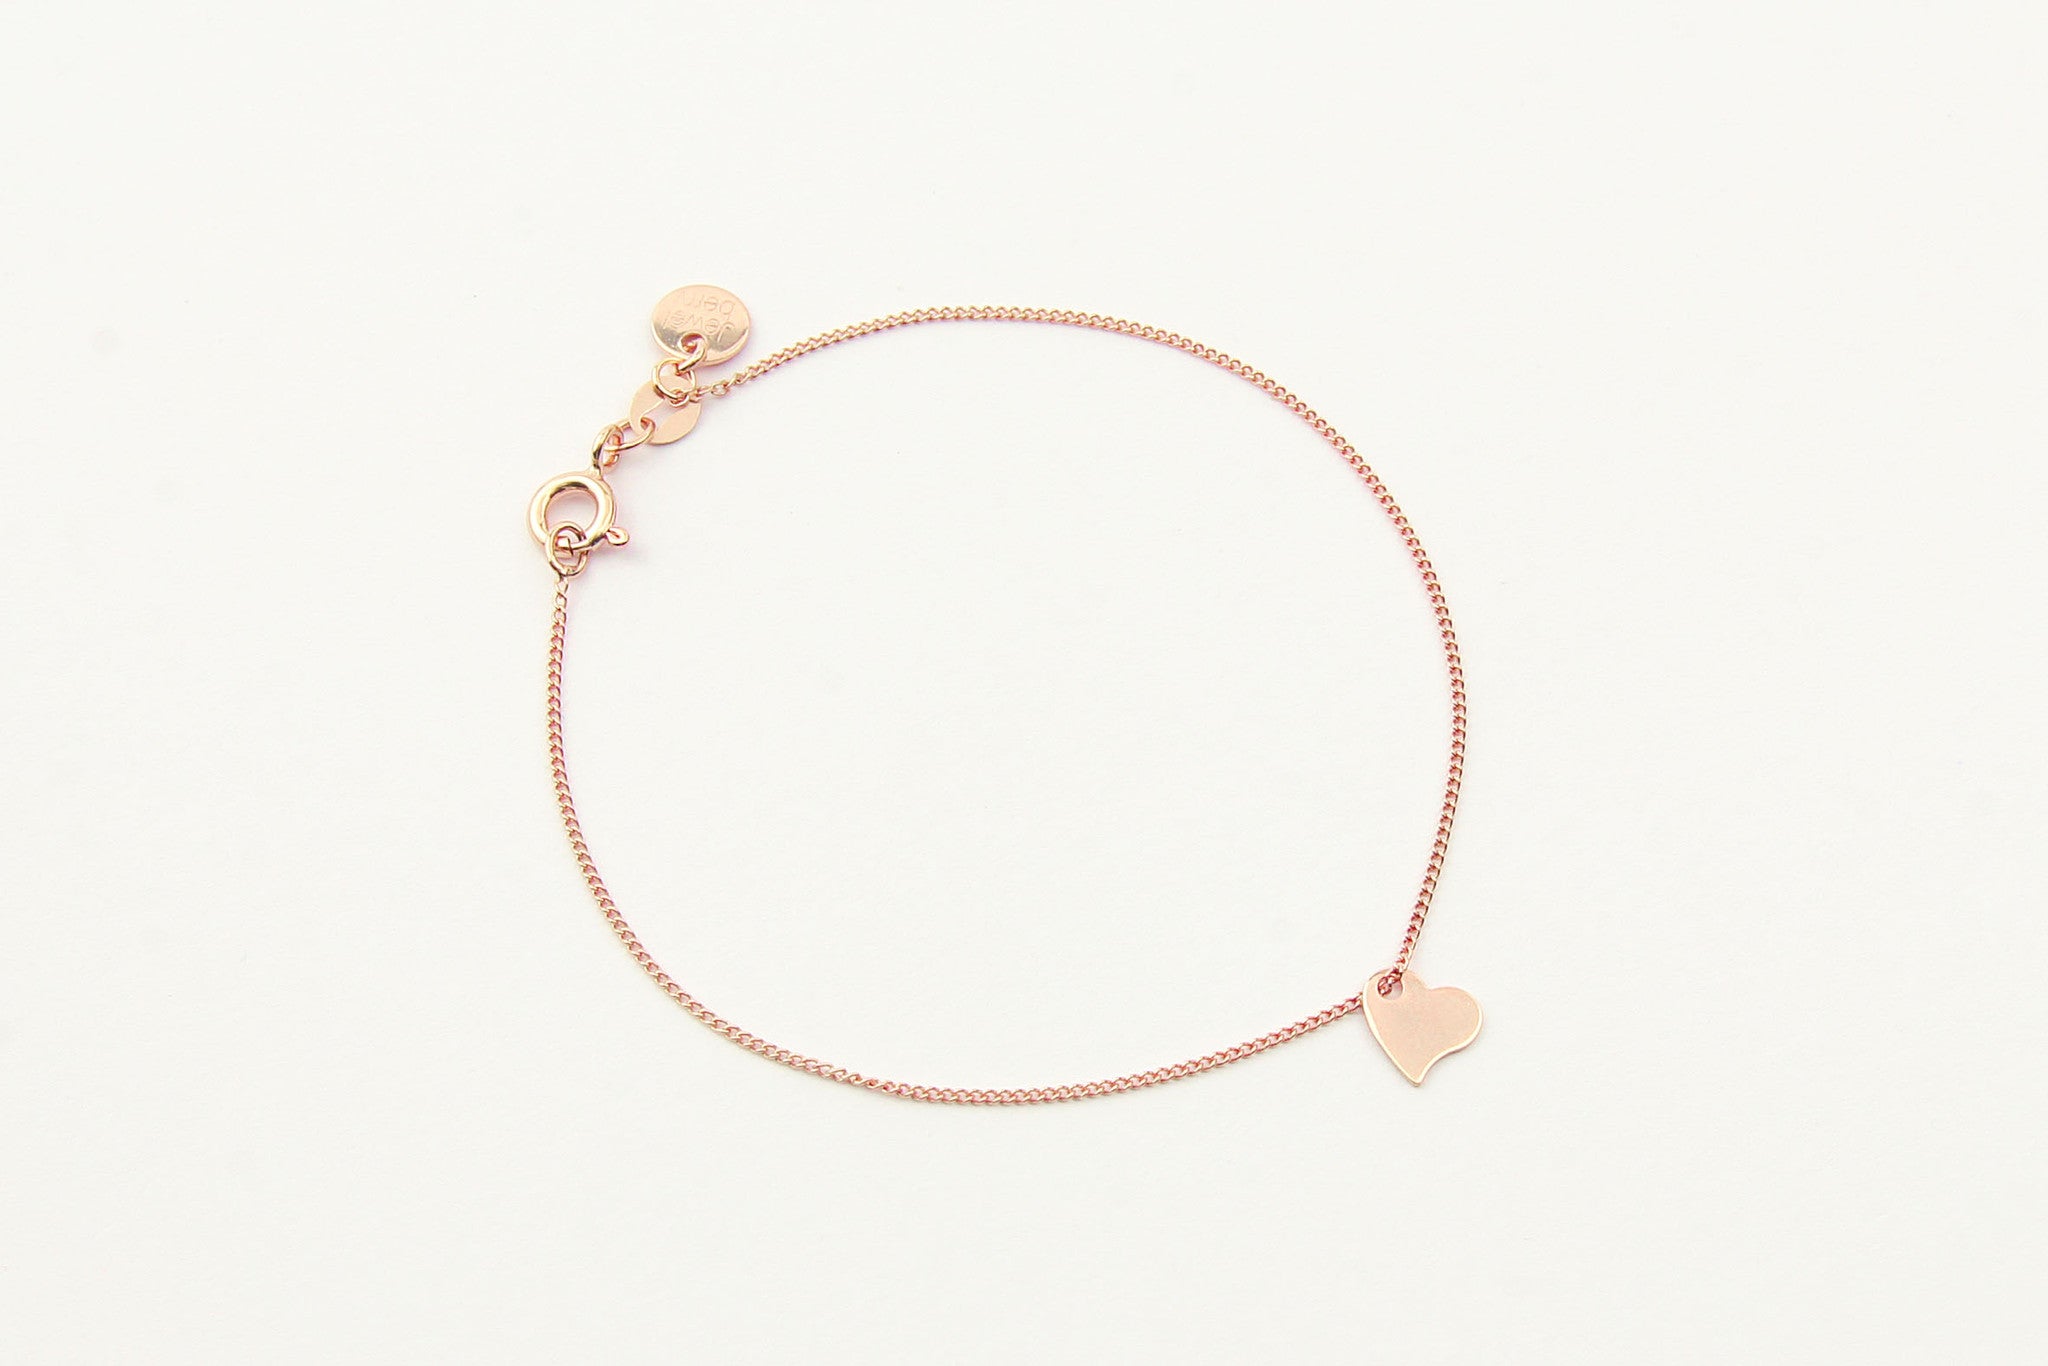 jewelberry armband bracelet my love rose gold plated sterling silver fine jewelry handmade with love fairtrade anchor chain